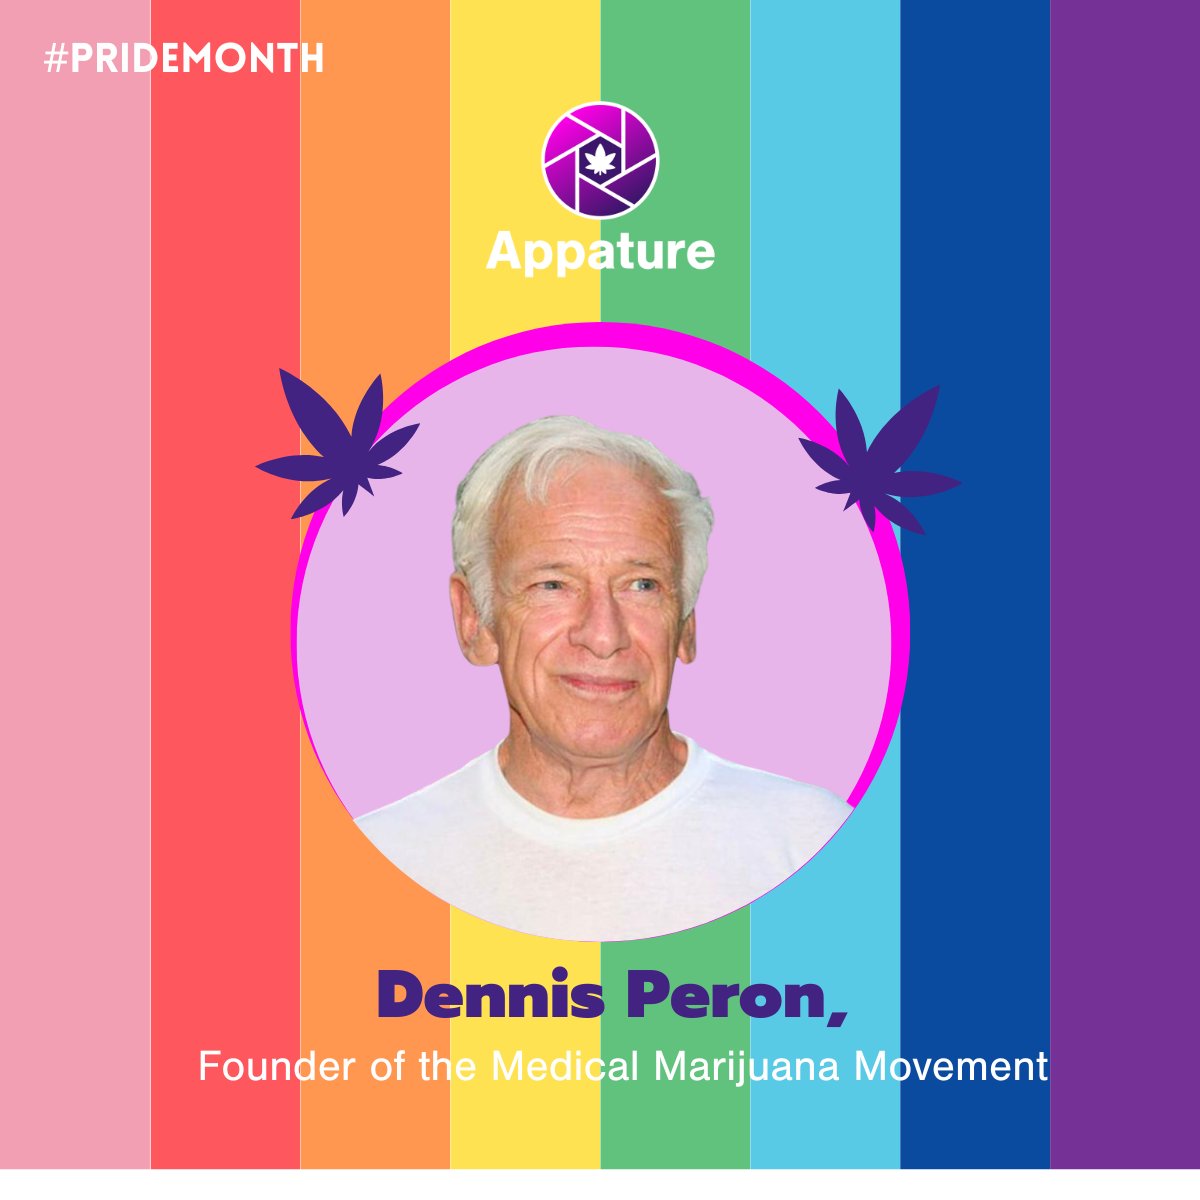 🌿 Celebrating #Pride and Cannabis Advocacy with Dennis Peron 🏥🌈
🌿 Founder of Cannabis Buyers' Club
🌿 Co-author of California Prop 215
🌿 Champion for HIV/AIDS patients
🌿 LGBTQ+ activist
...+
 #DennisPeron #MedicalMarijuana #CannabisAdvocacy #PrideAndProgress #LGBTQRights'